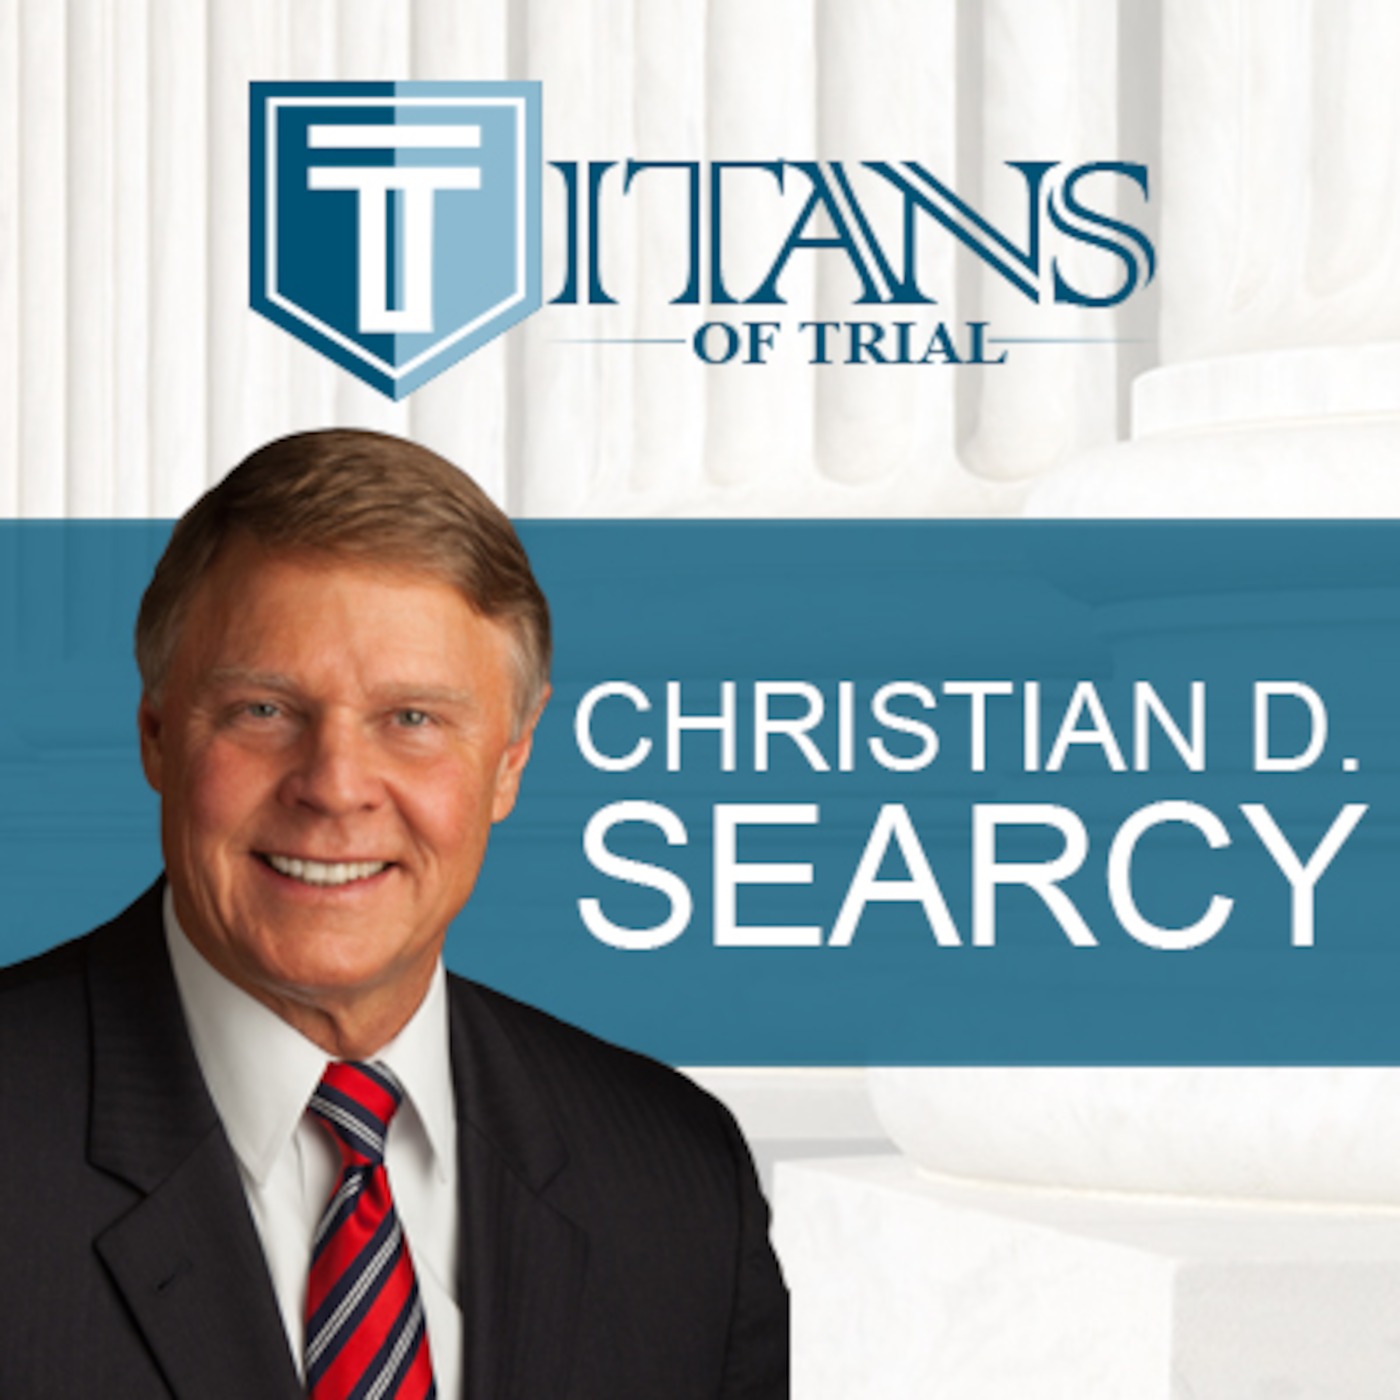 Titans of Trial - Chris Searcy